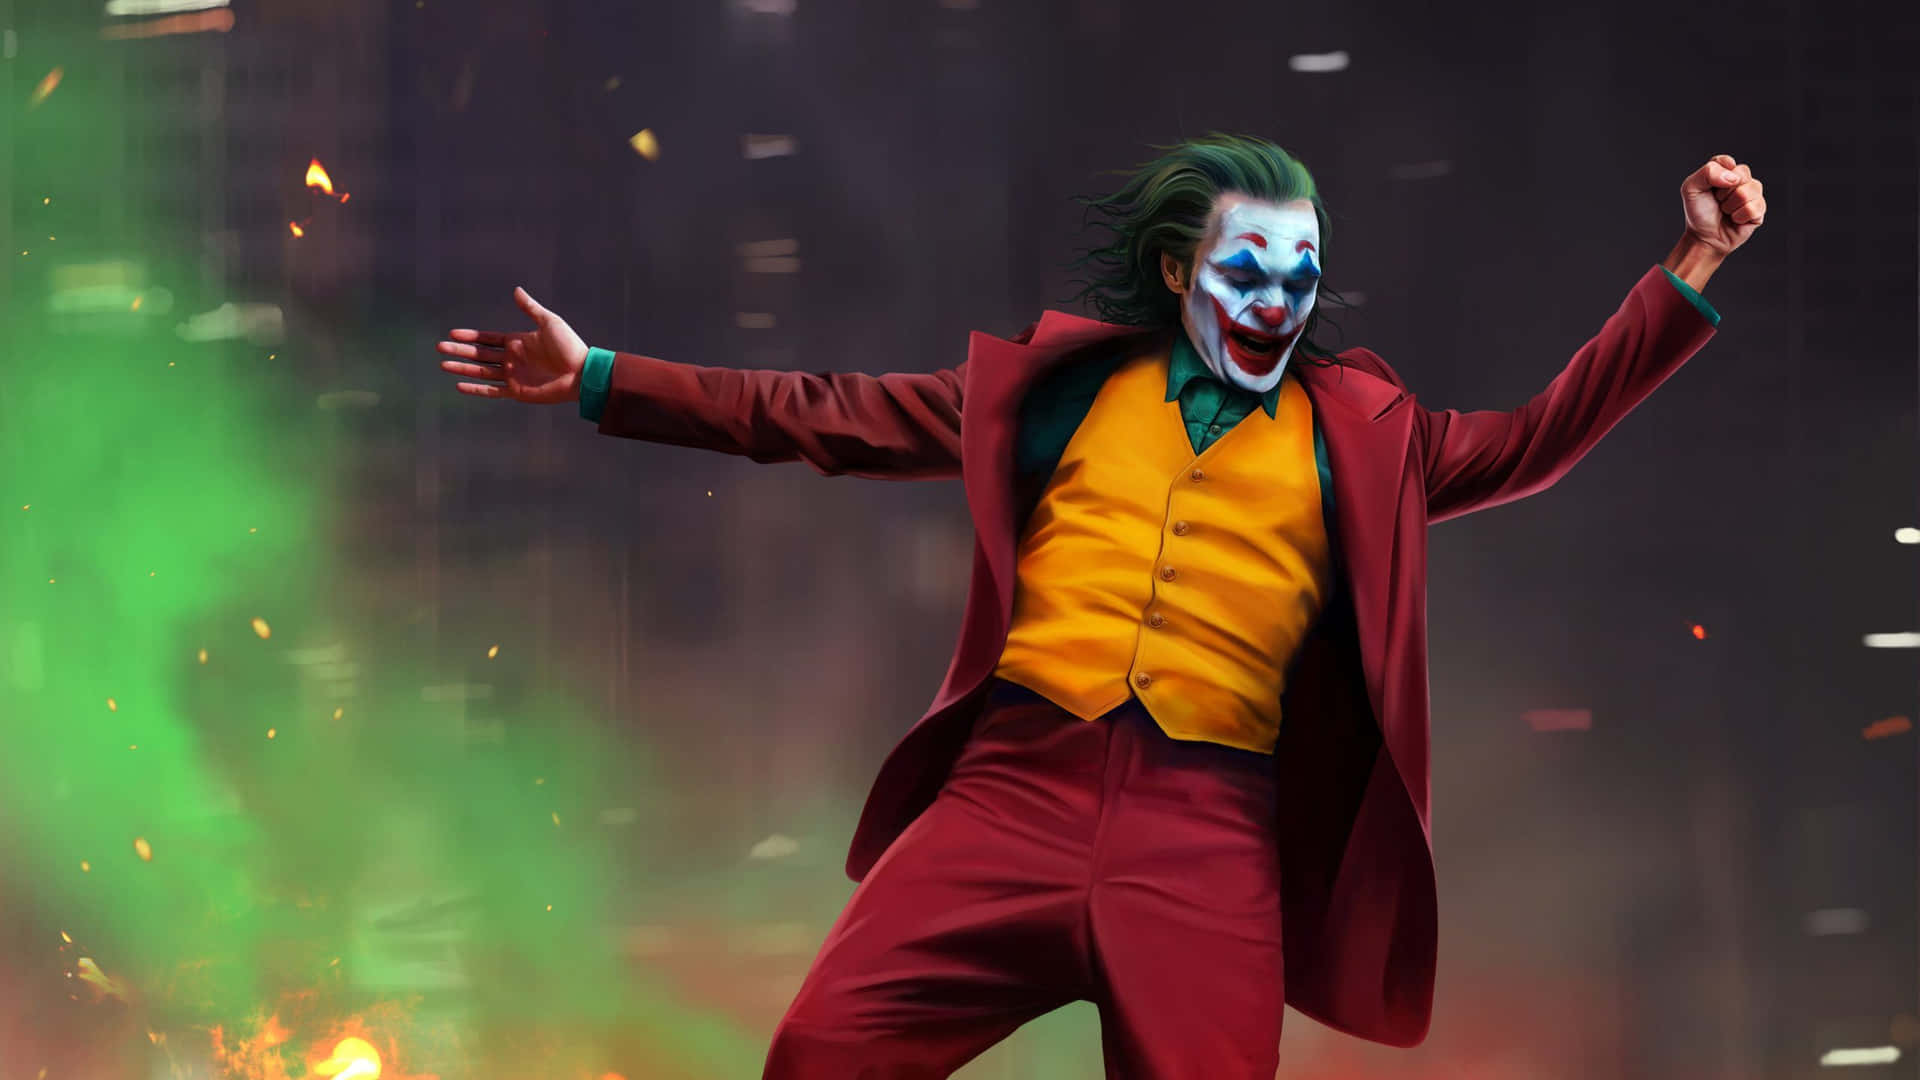 A Joker In A Suit Is Standing In Front Of A City Wallpaper